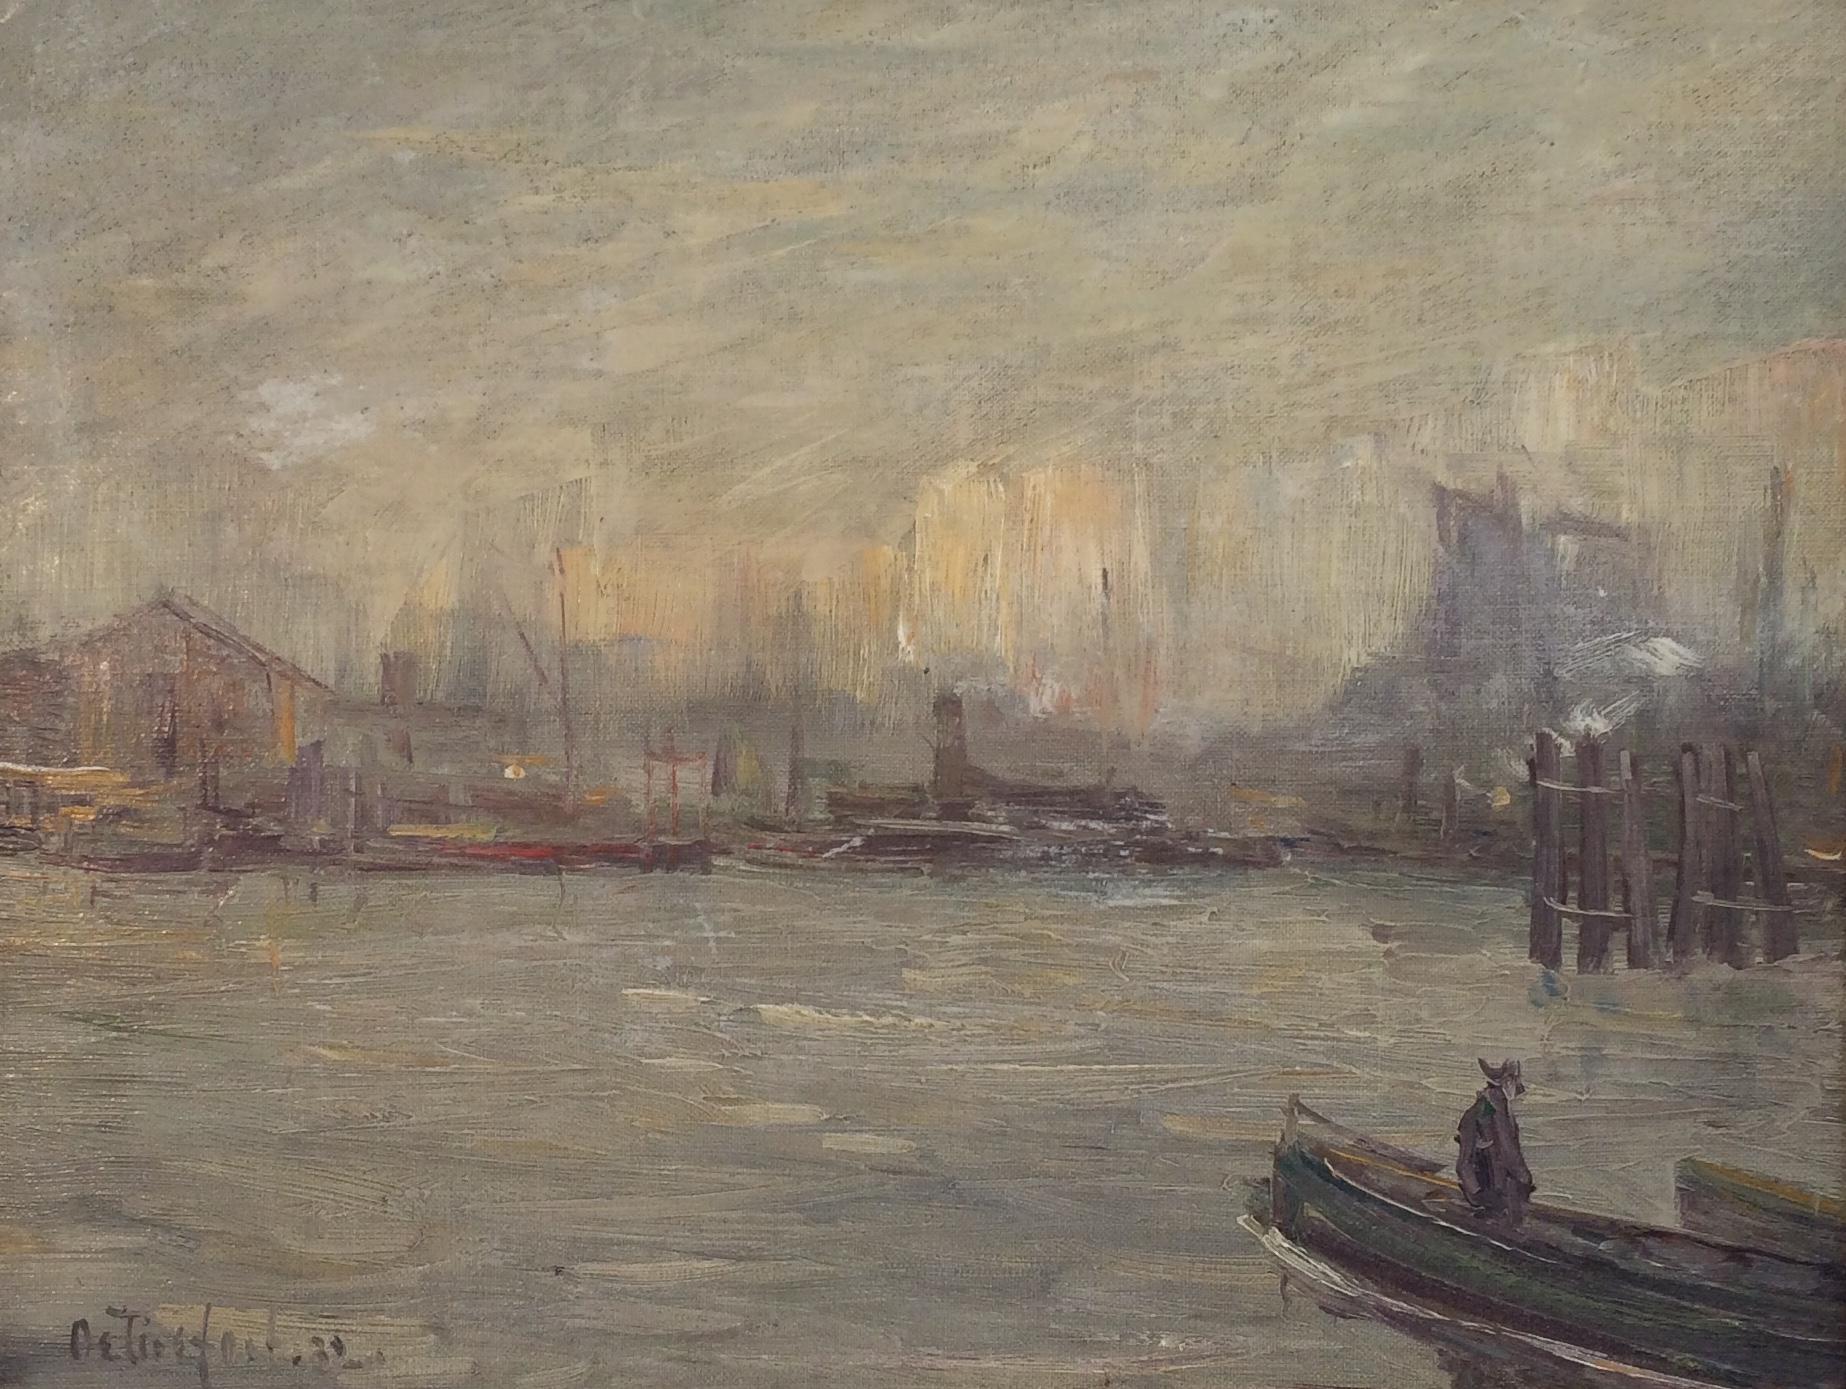 "New York City Harbor," Modernist View of Port and Boats on a Cloudy Day